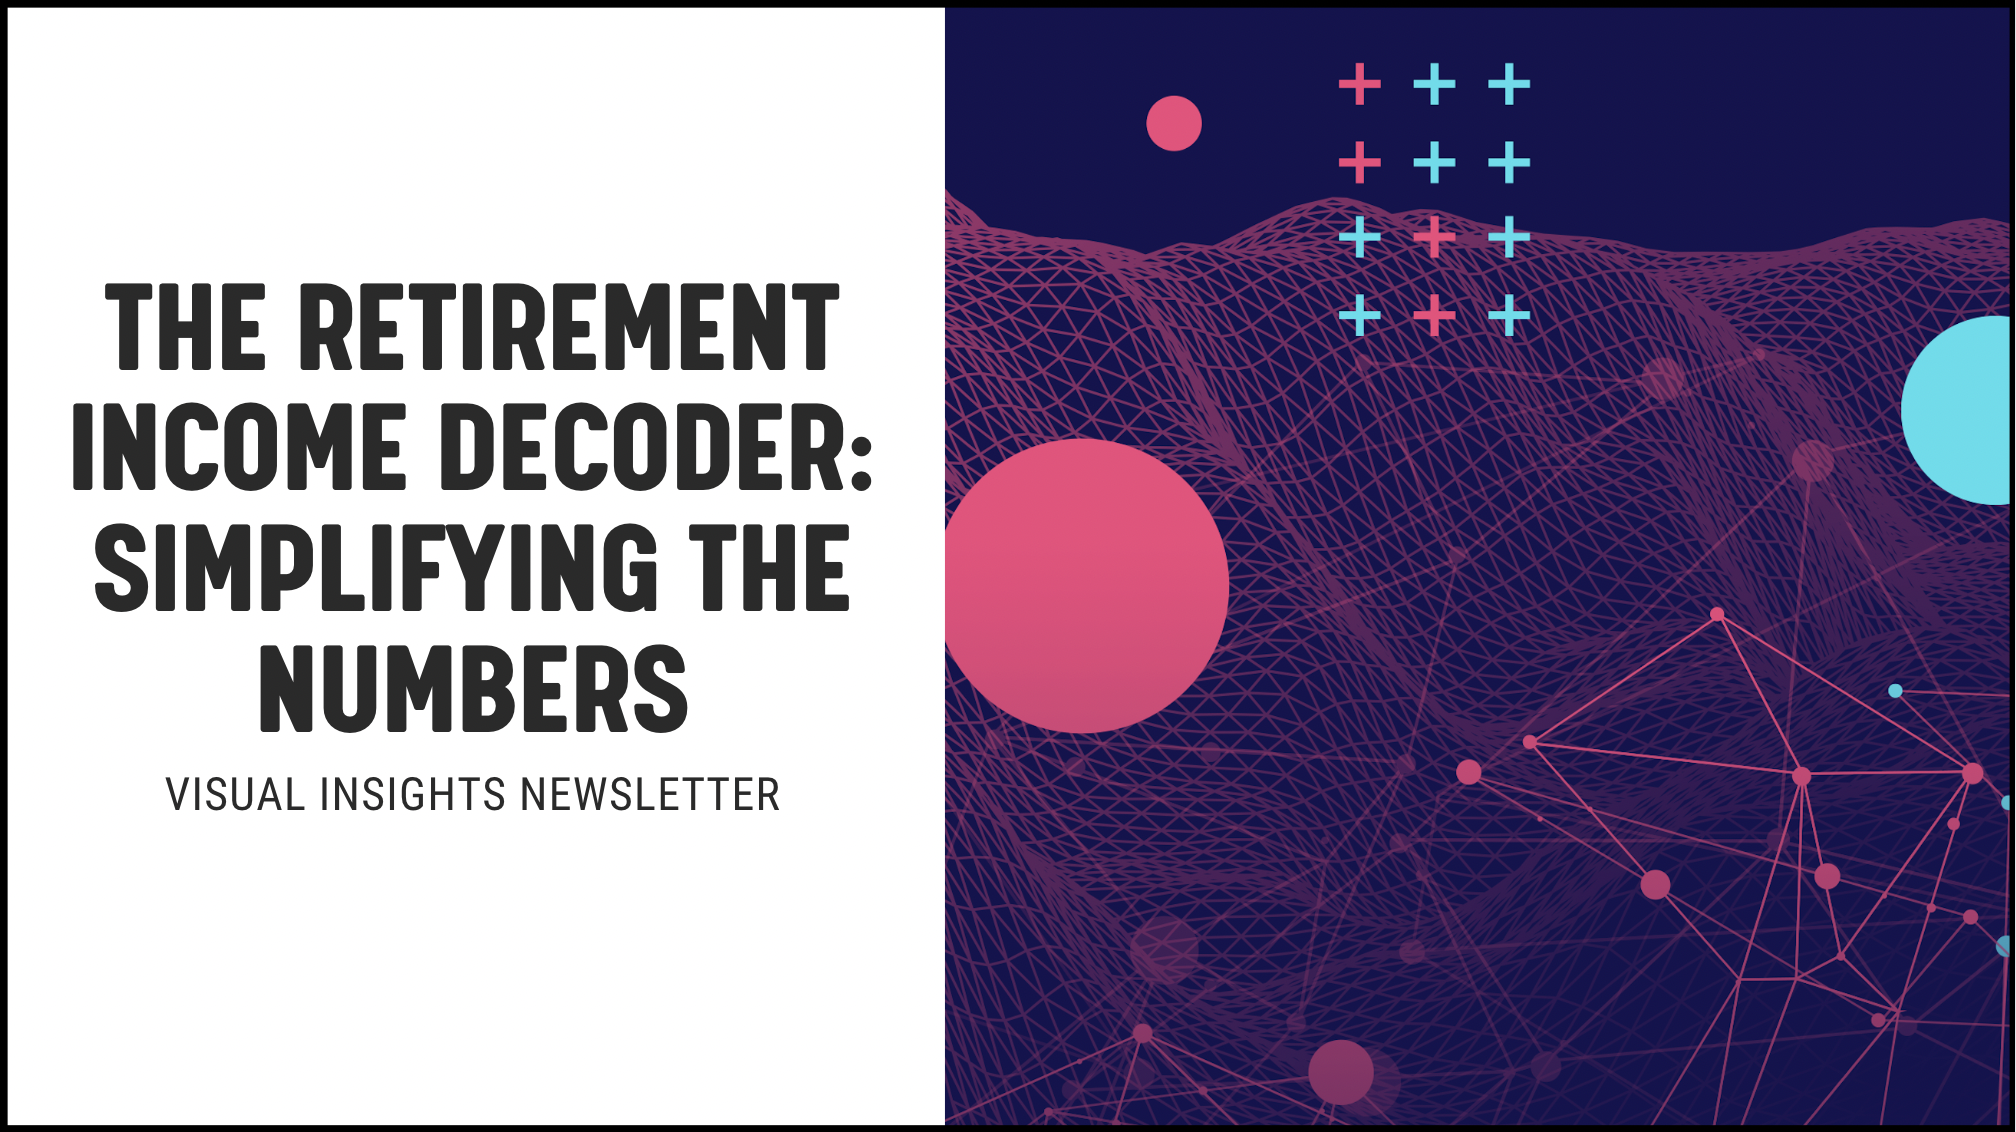 [NEW] The Retirement Income Decoder: Simplifying the Numbers - Visual Insights Newsletter Marketing Campaigns for Financial Advisors